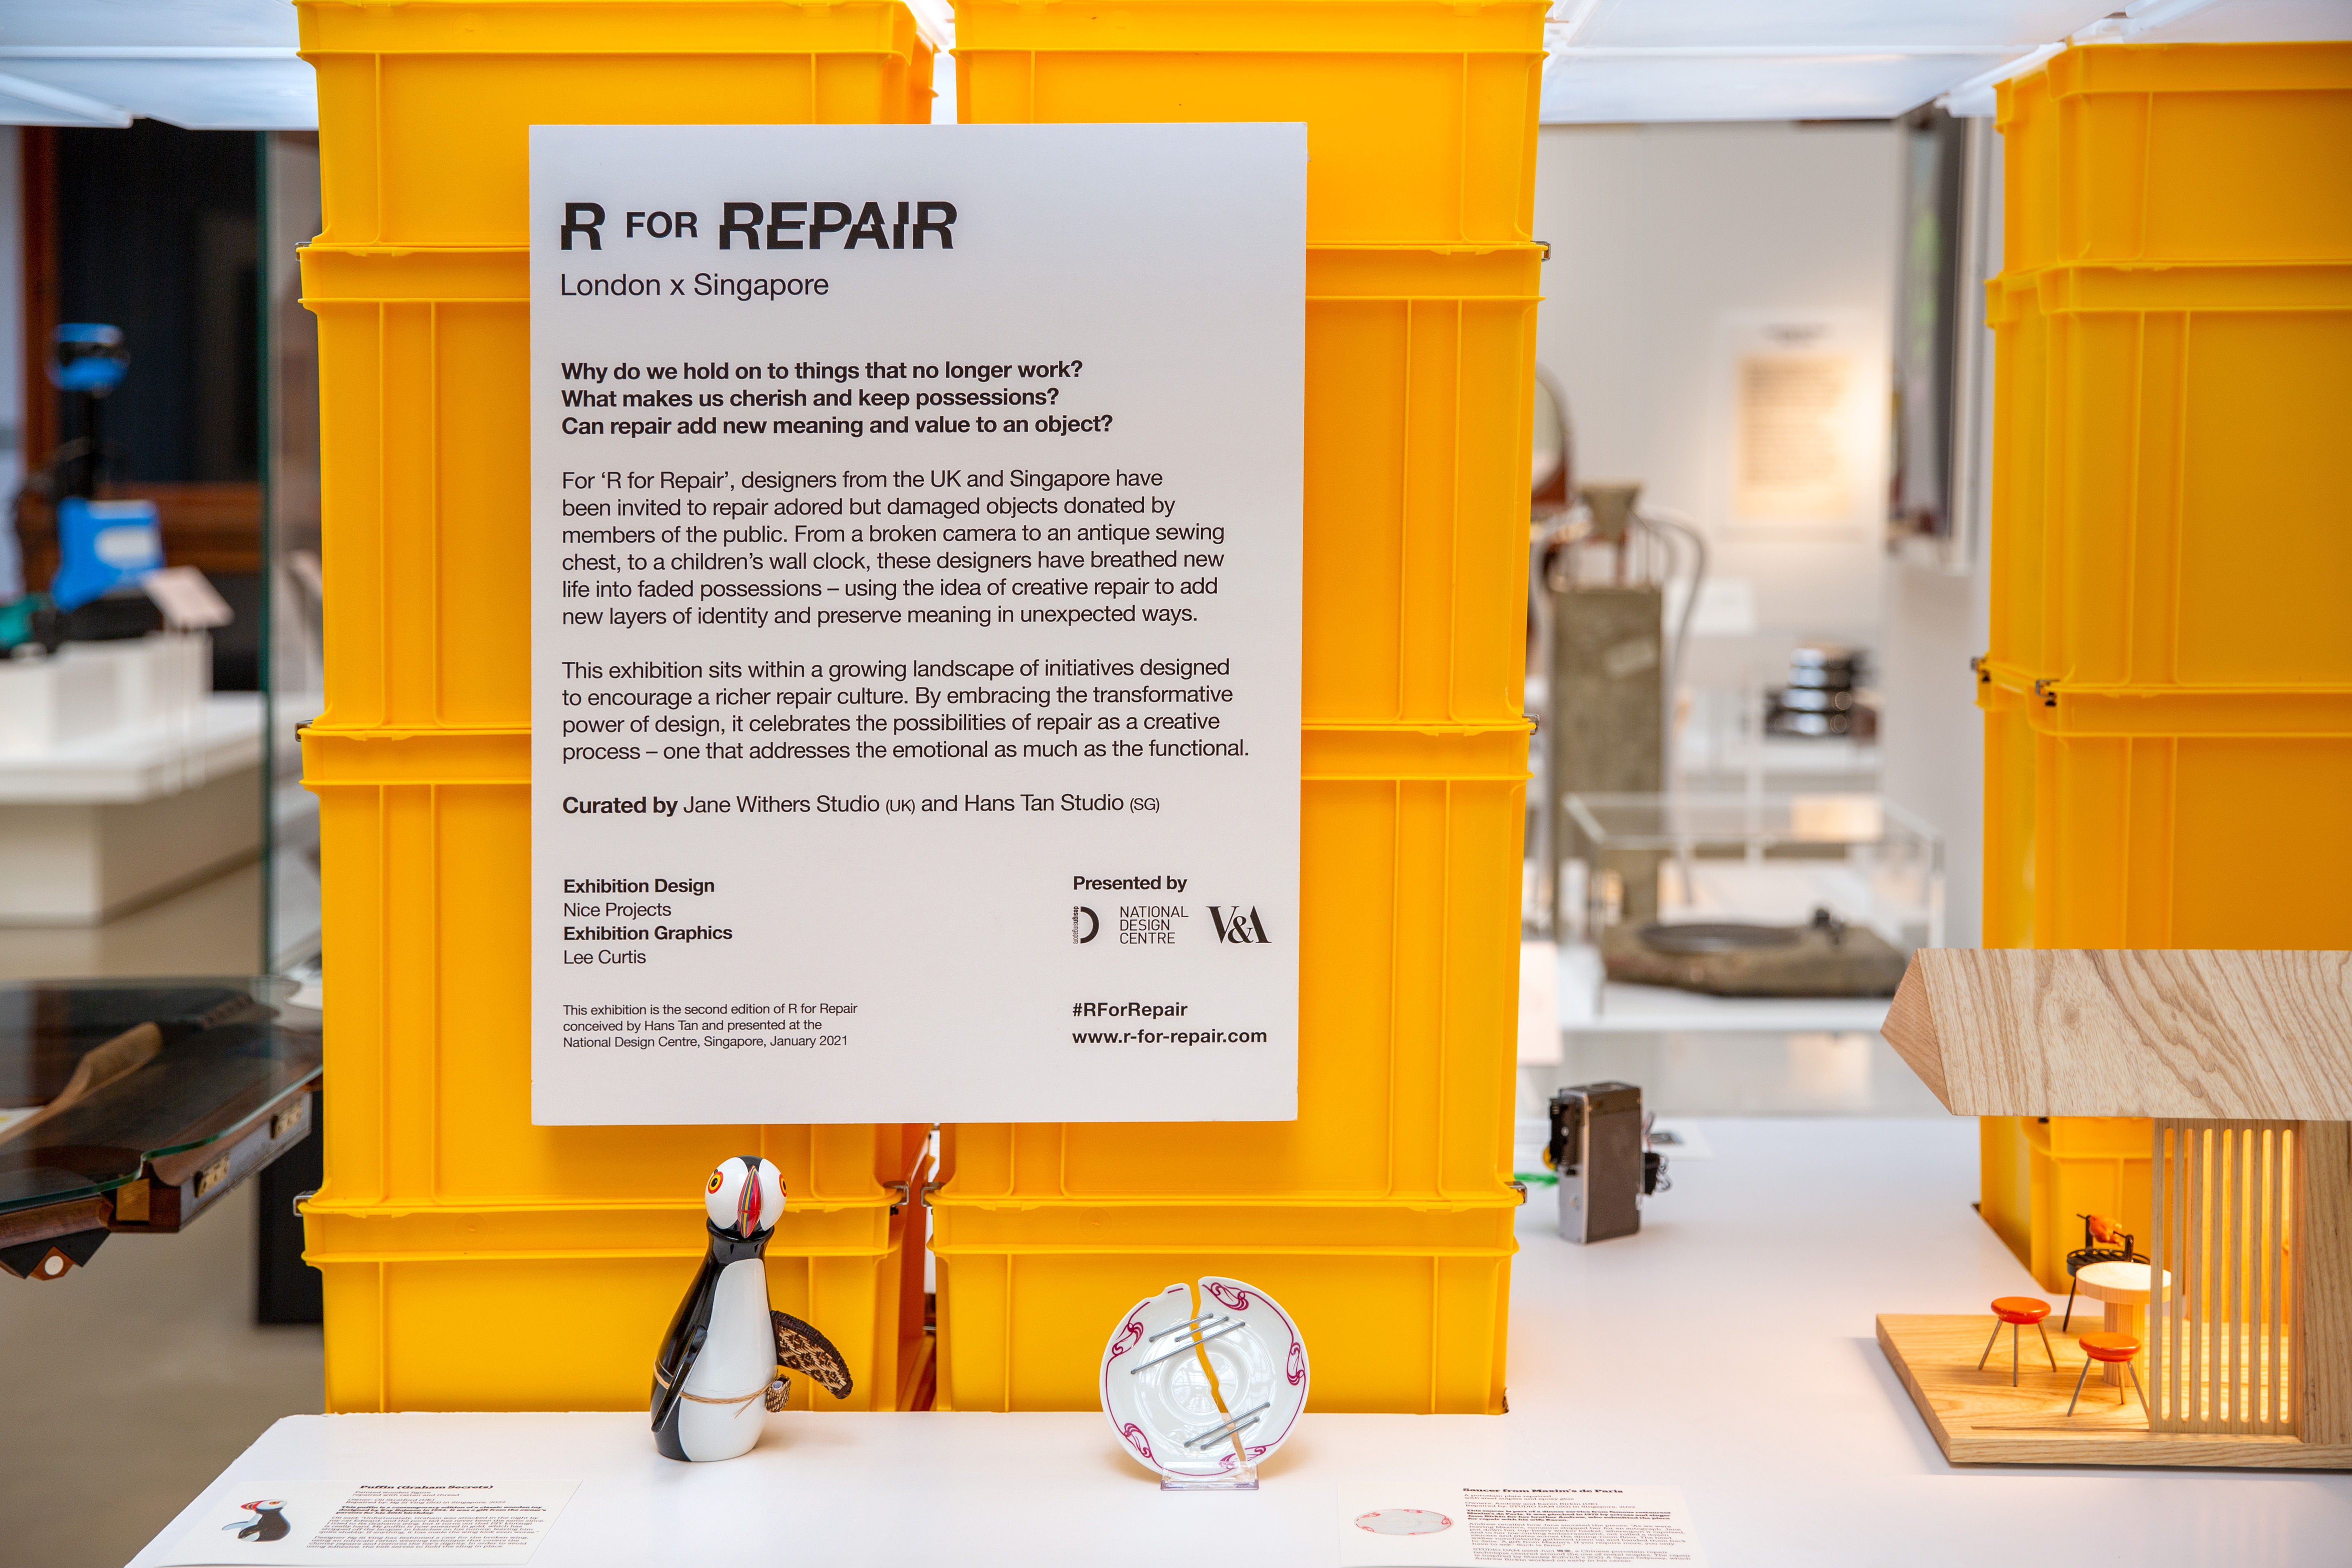 R for Repair: London x Singapore at the V&A London. Imagery by Zuketa Film Production